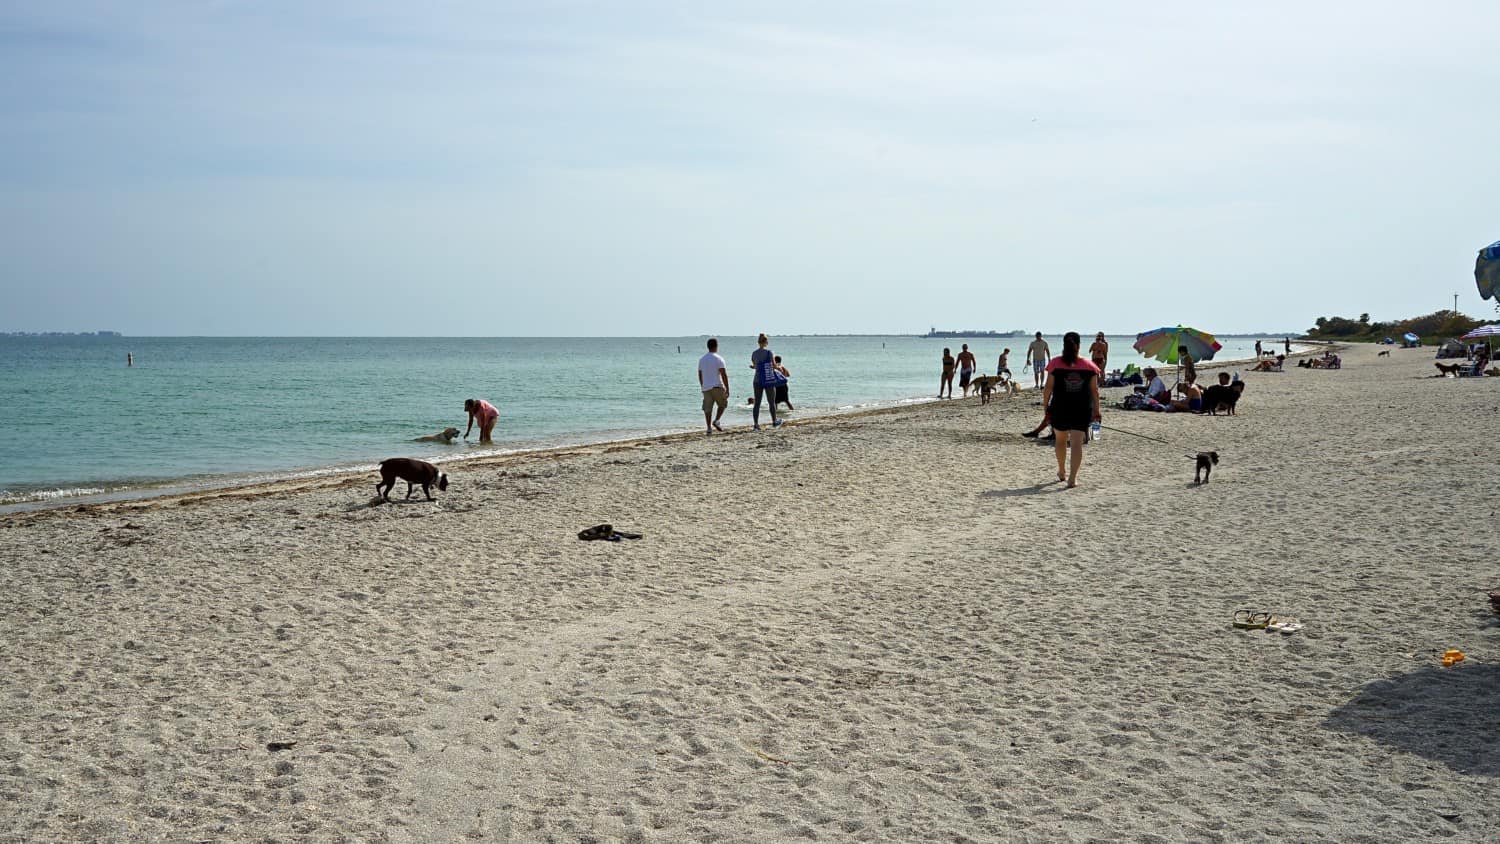 The best attraction in Florida suitable for pets: Fort De Soto Park and dog beach |  GoPetFriendly.com